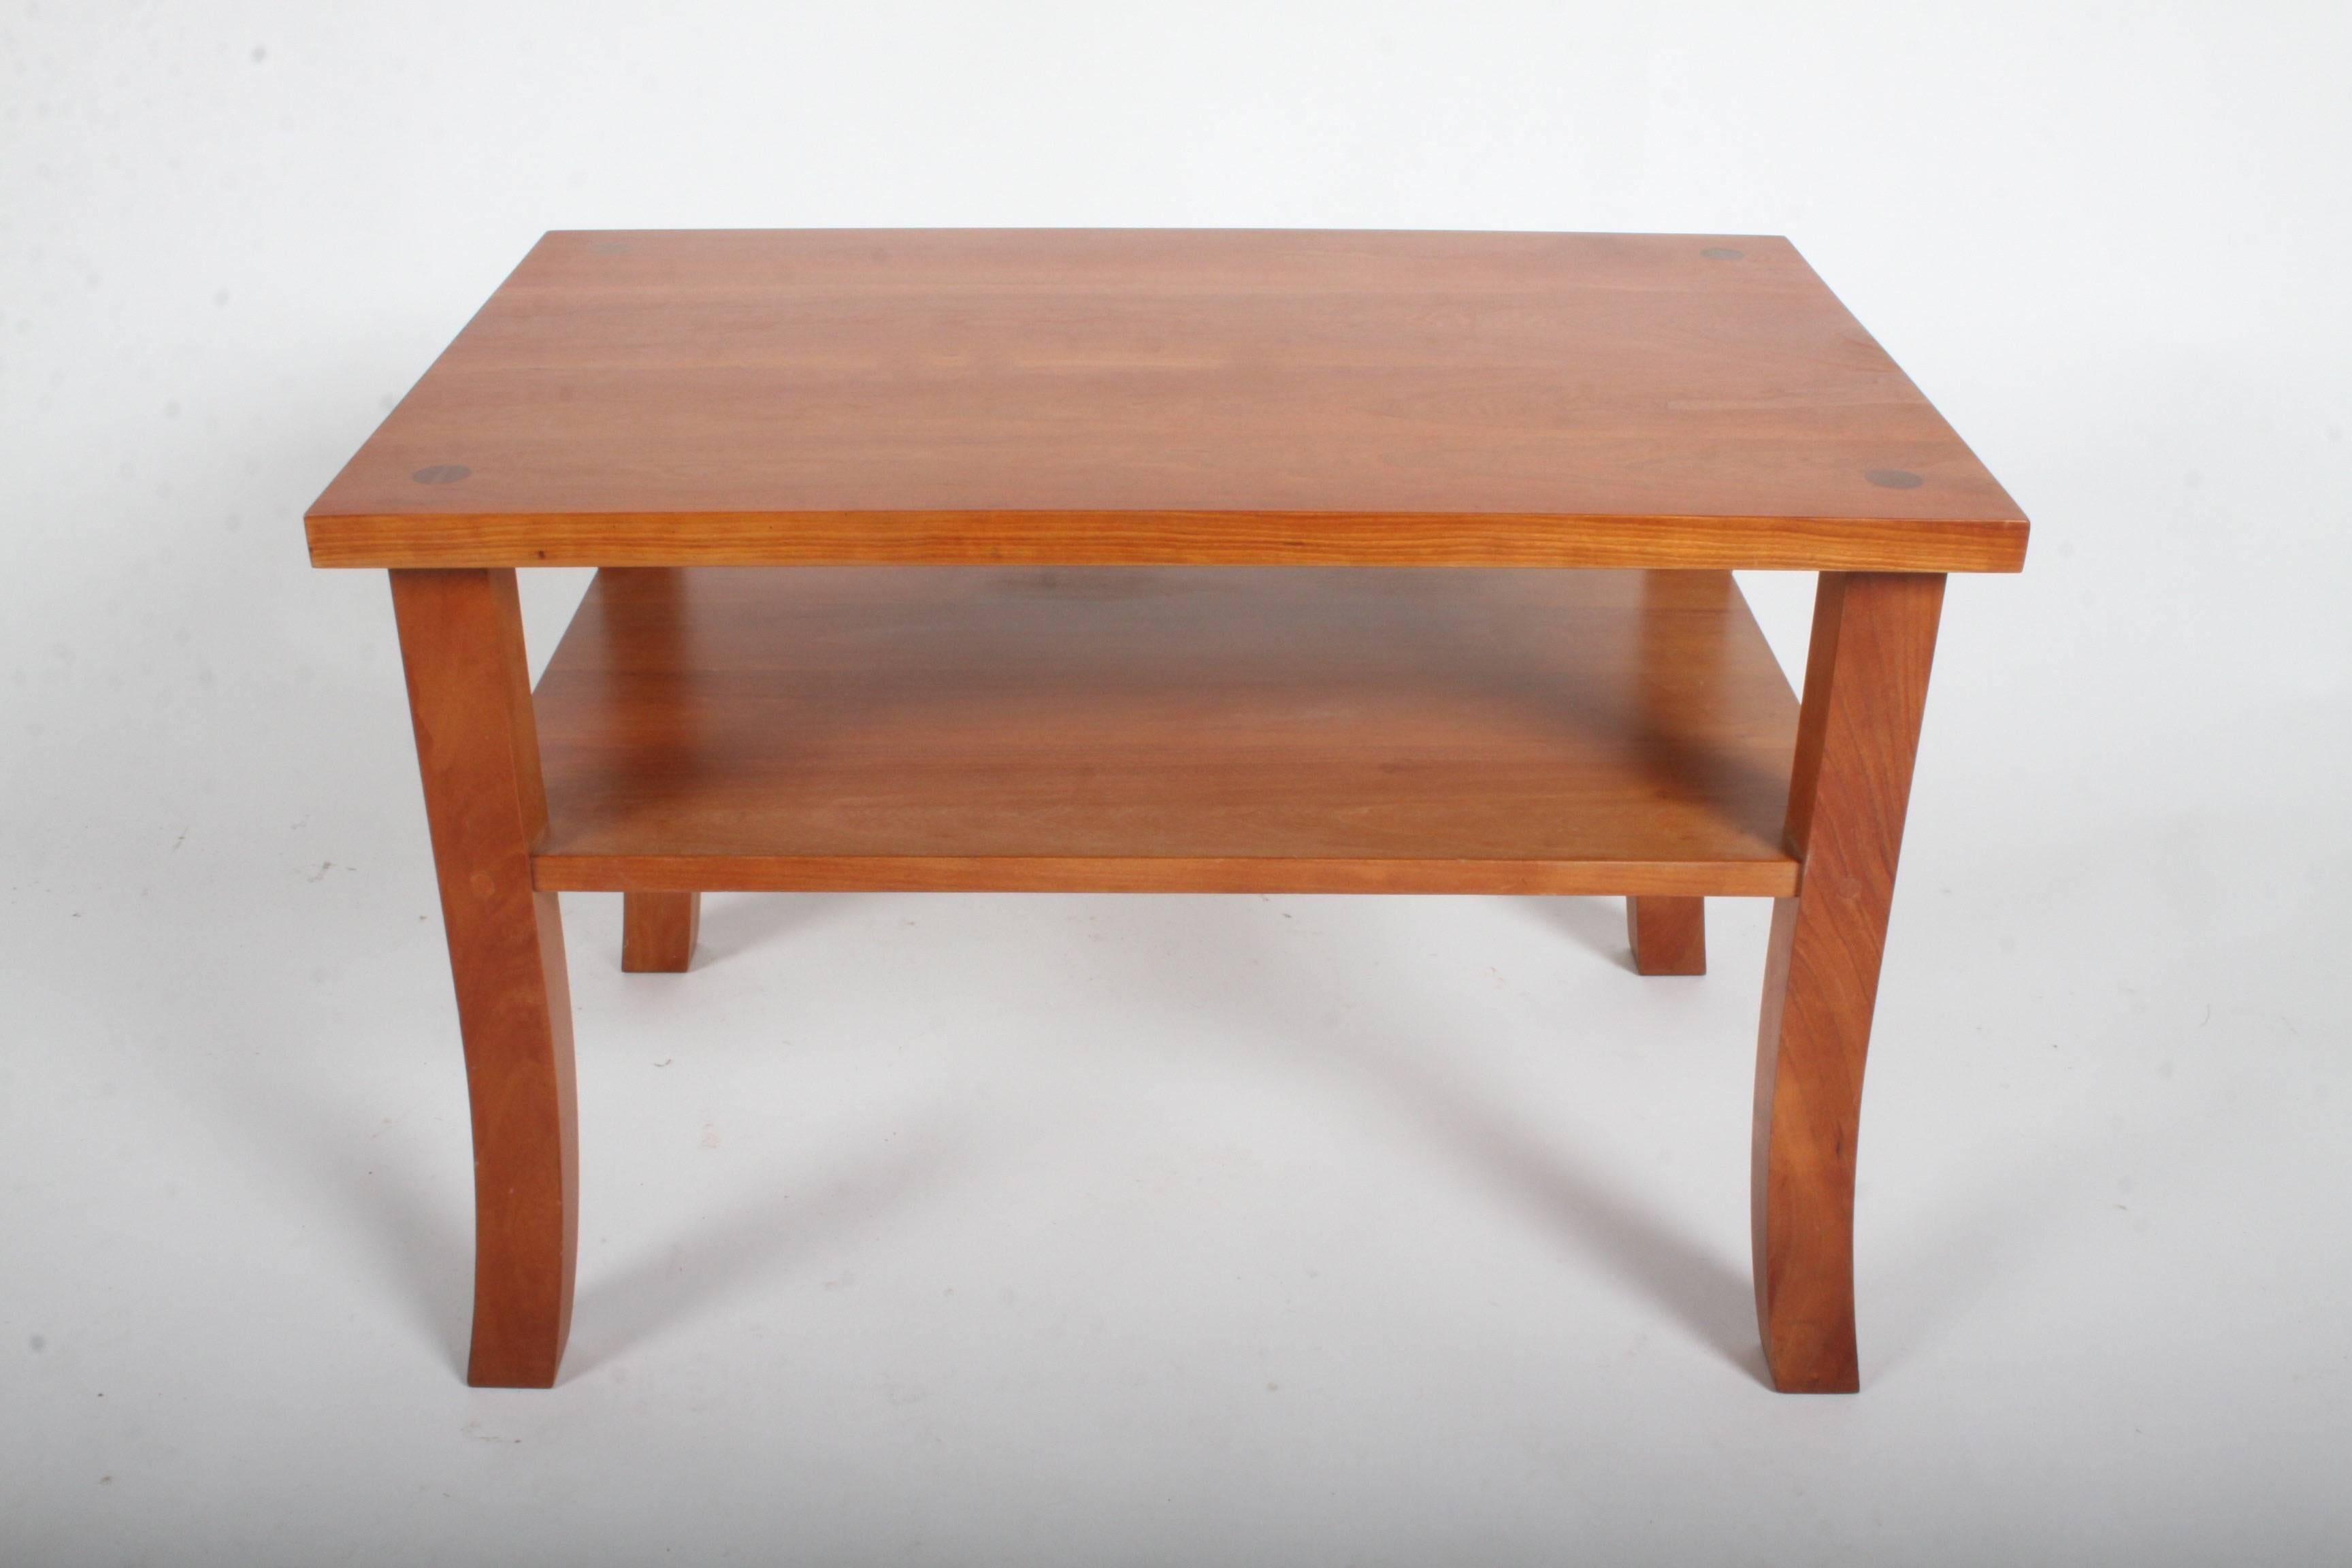 Thos. Moser lolling side table in cherry, circa 2004, signed and dated. One owner, nice original condition, minor scuffs.